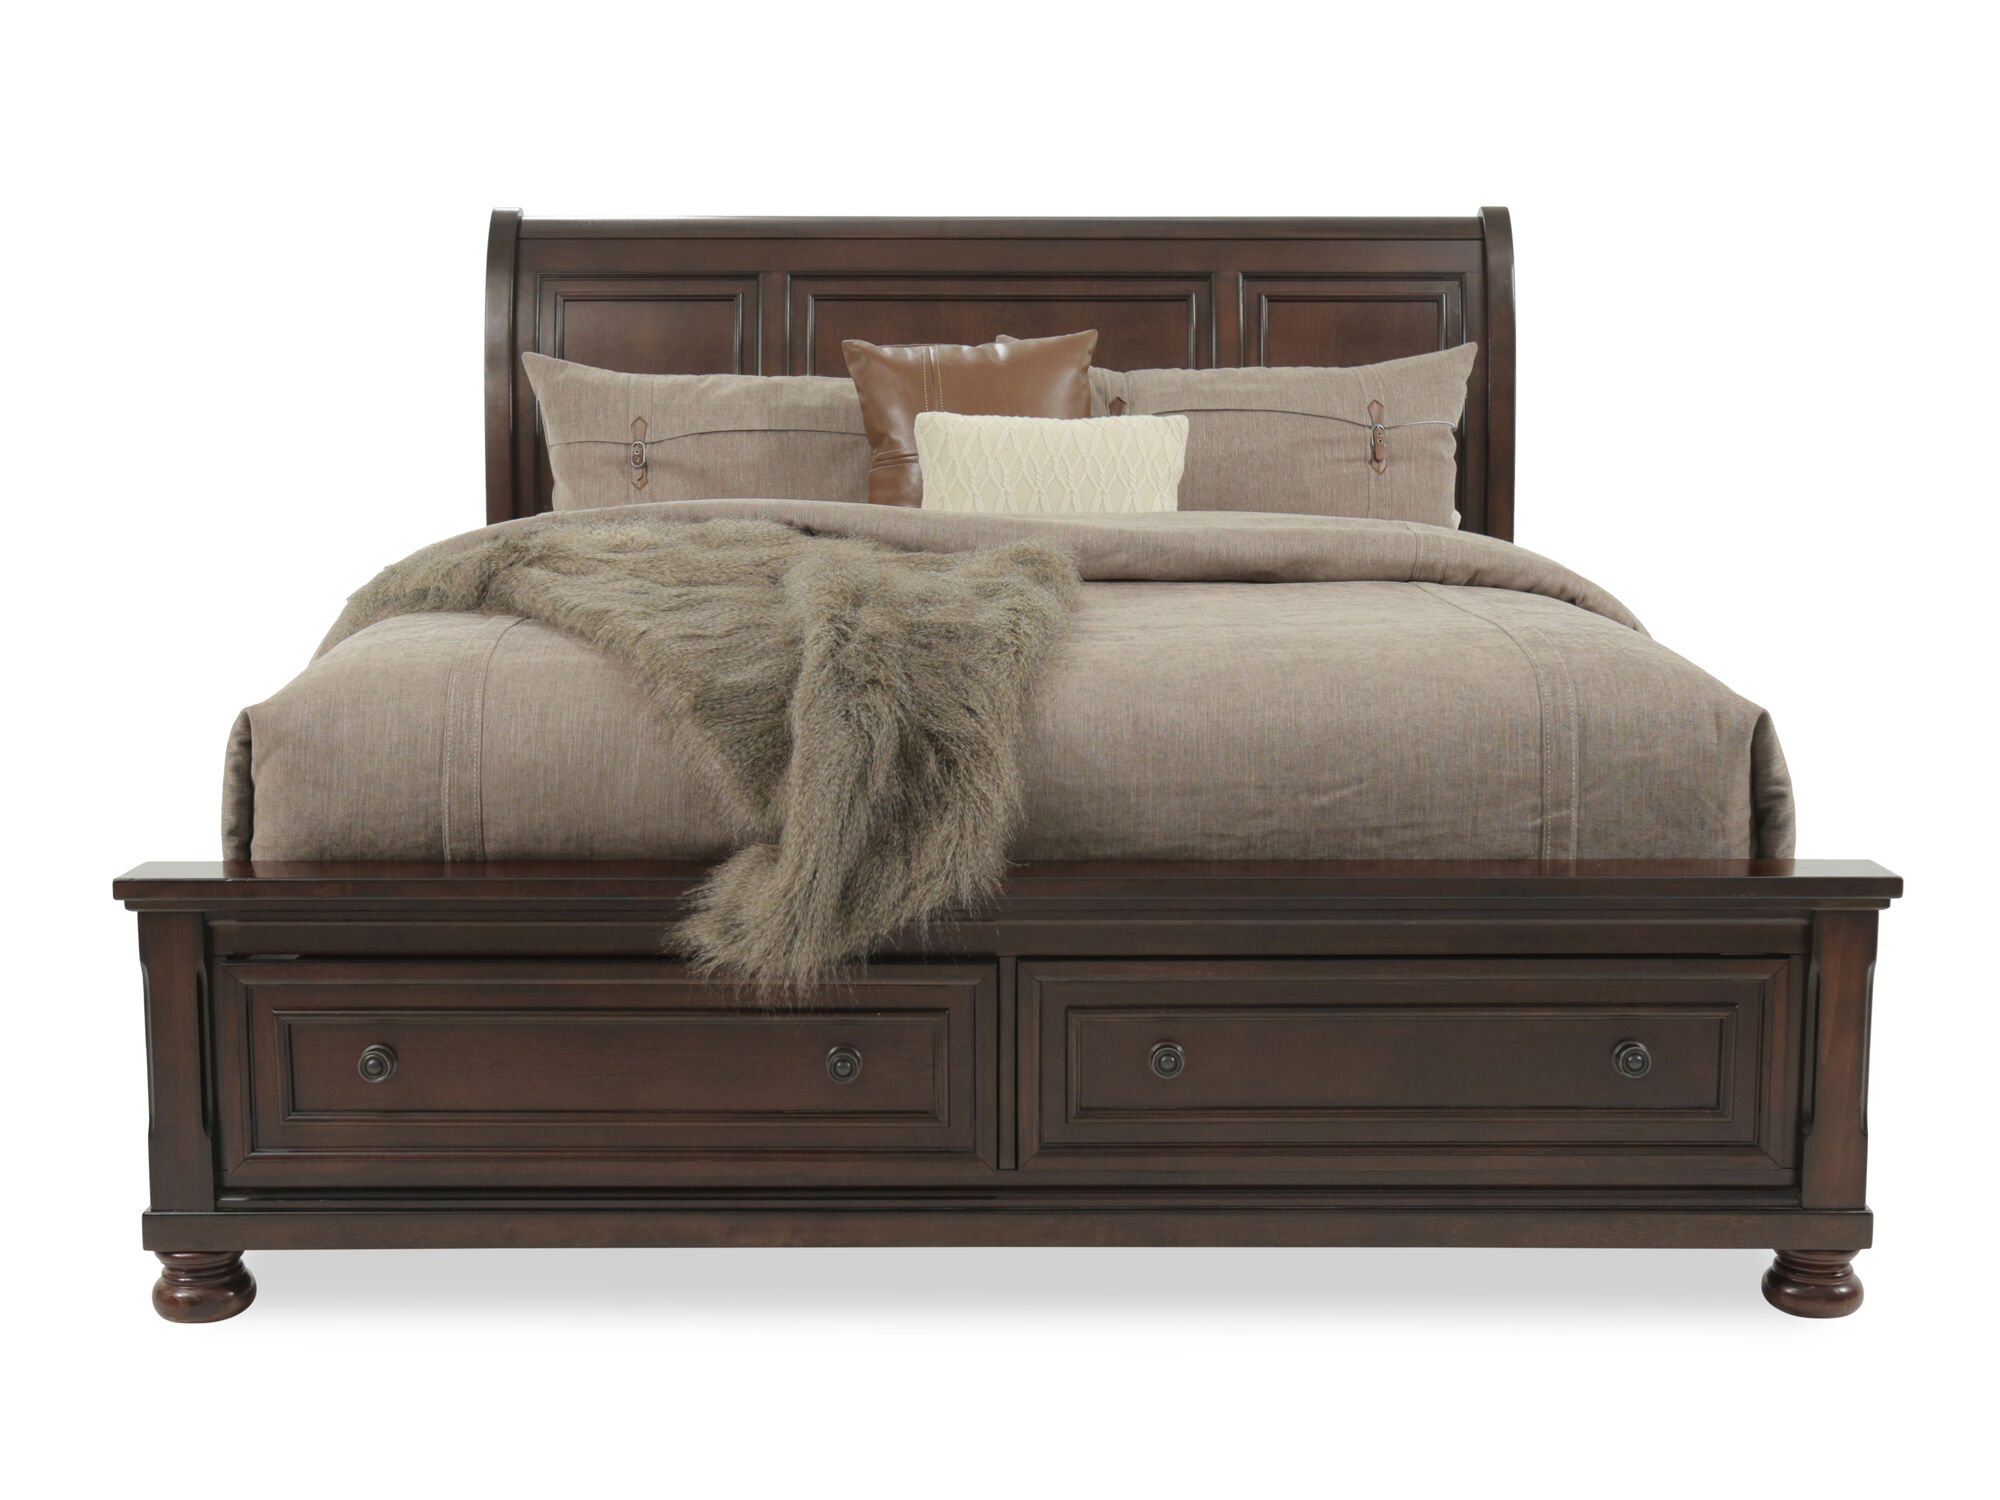 57 Traditional Beveled Sleigh Bed In, Bed With Storage Name